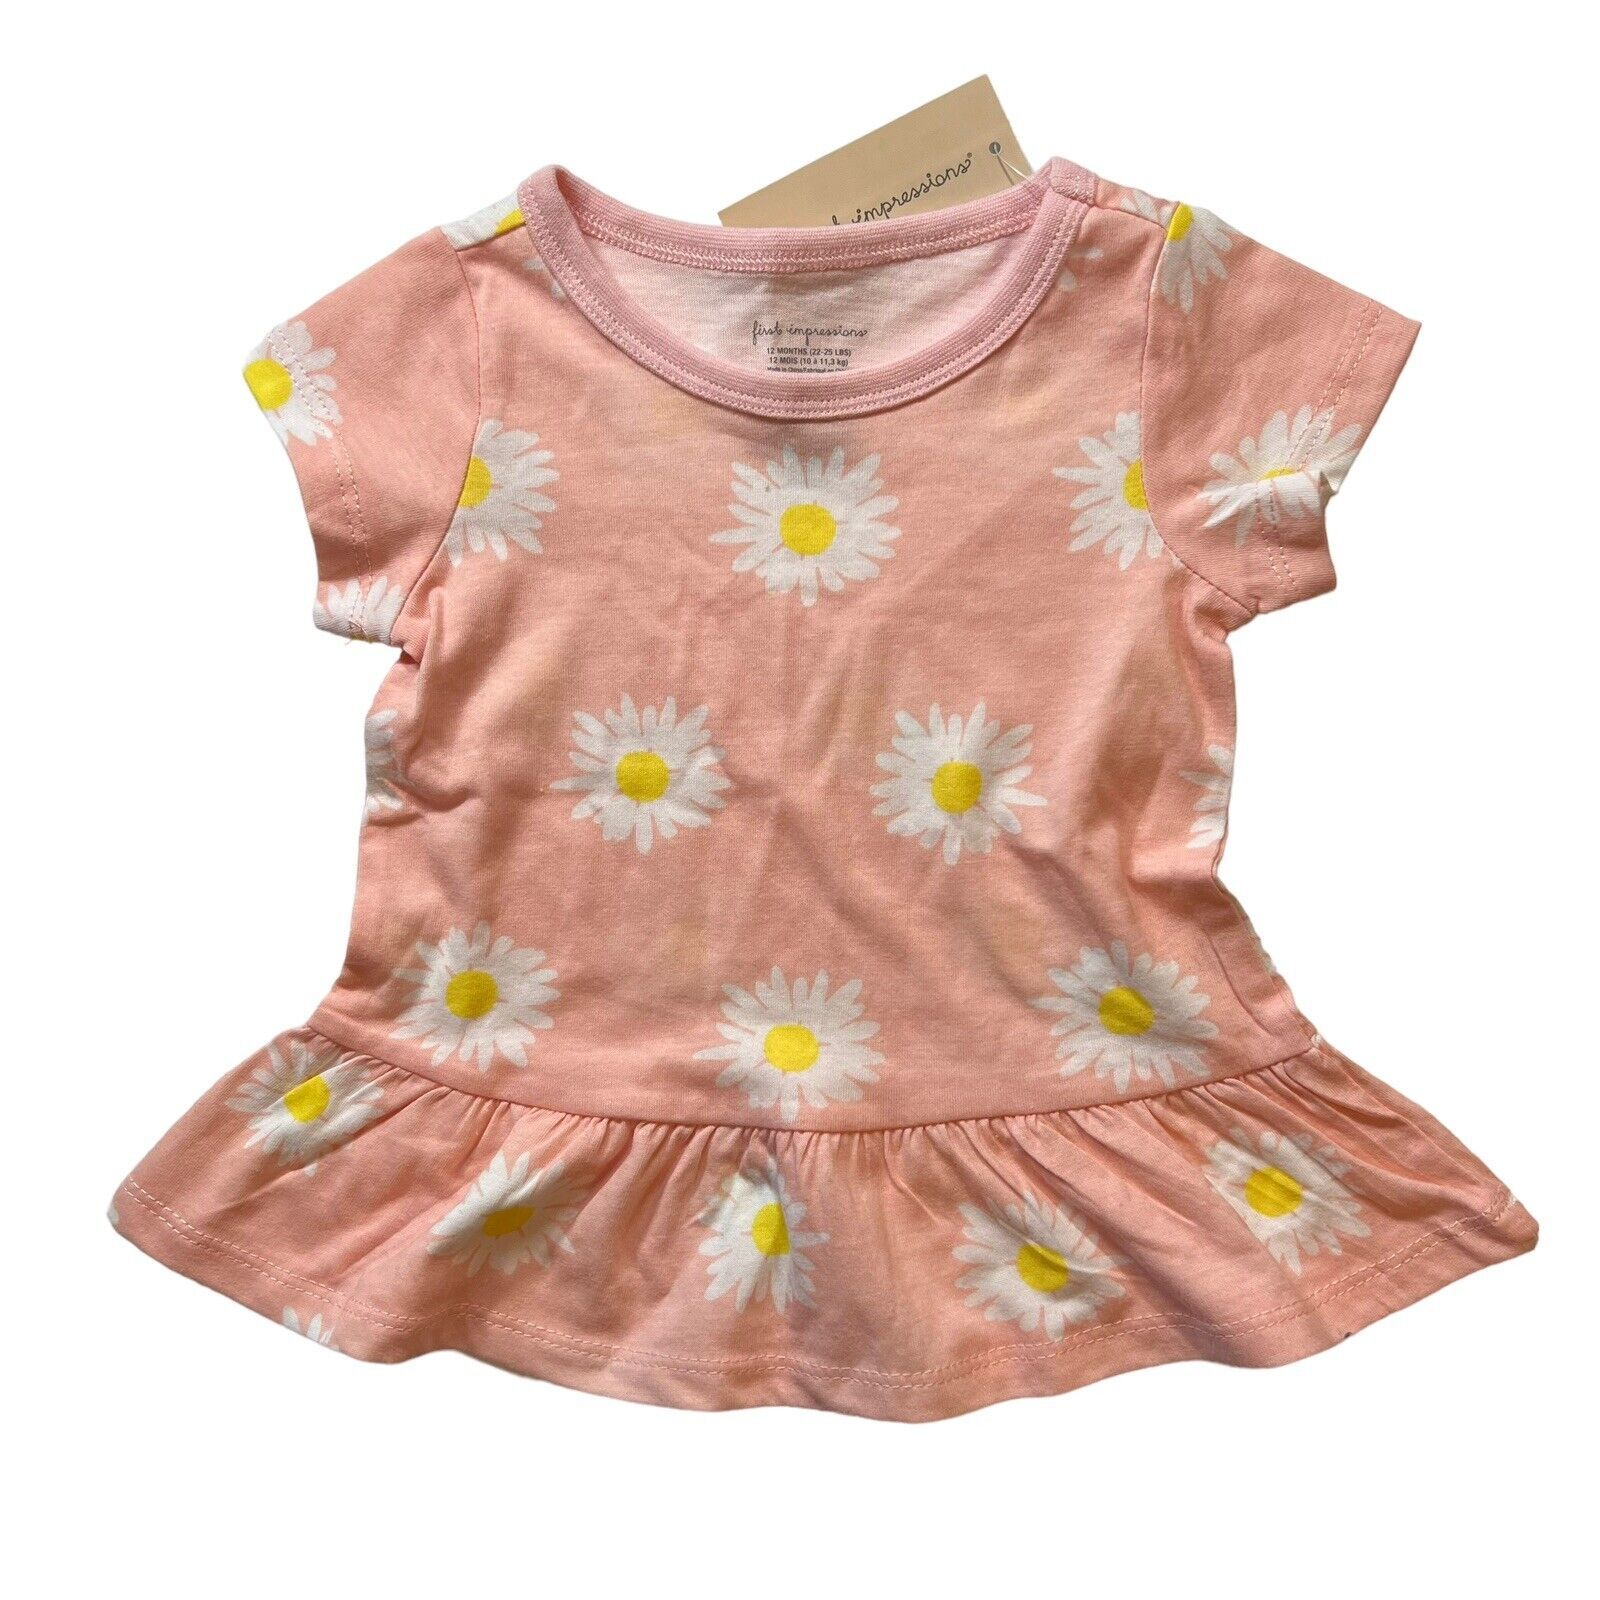 Baby Girl Pink Floral Peplum Top 12 Month New - $7.85